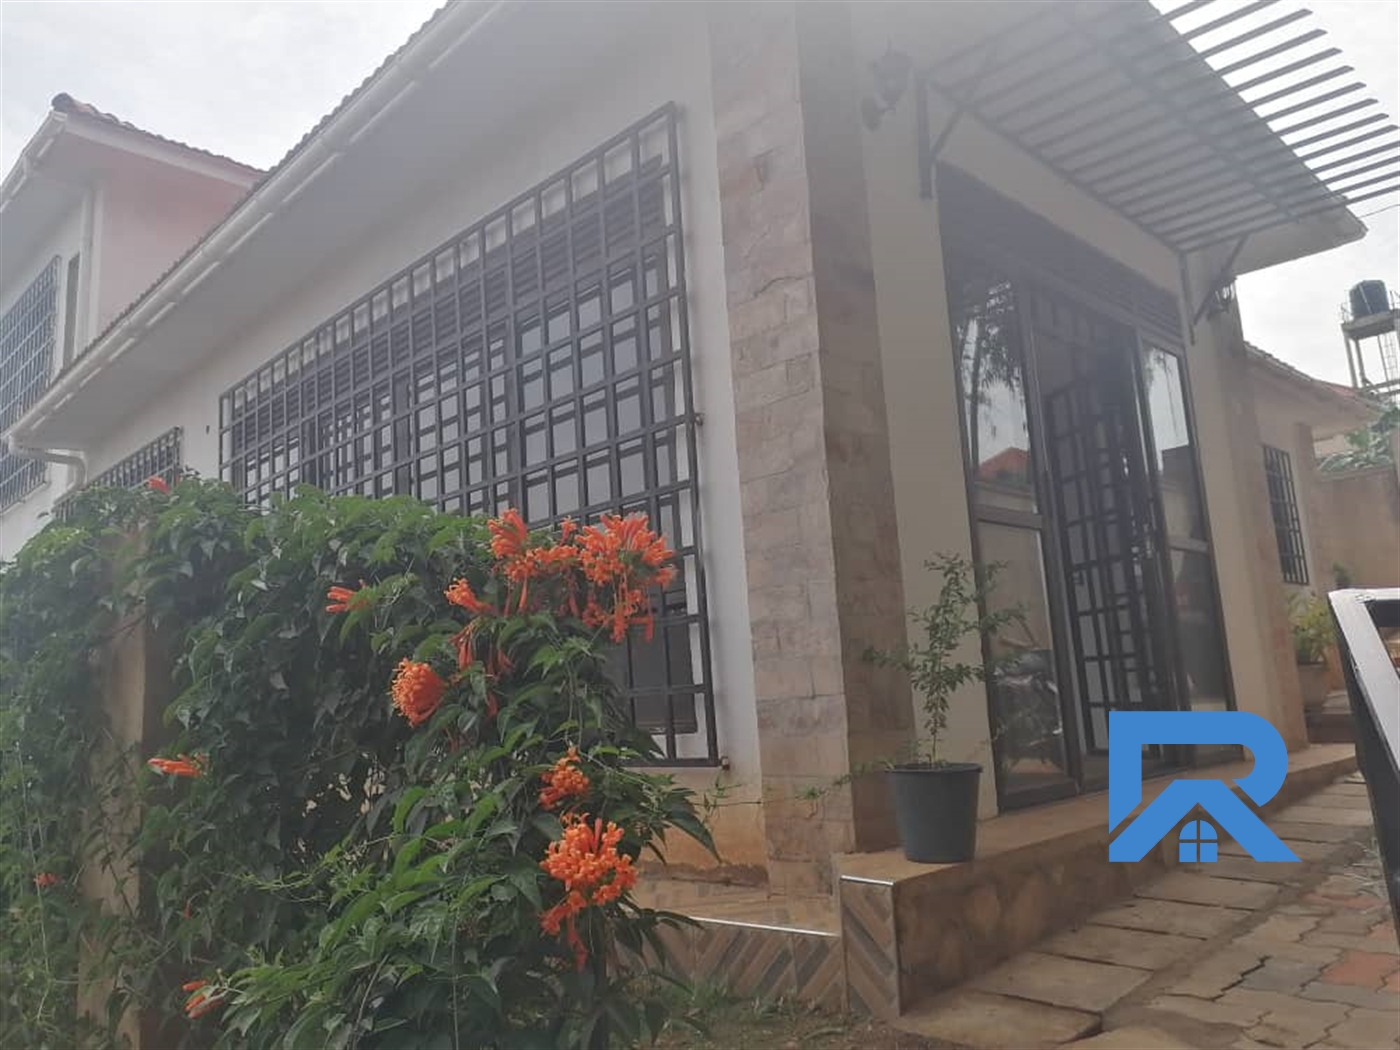 Bungalow for rent in Bulindo Kampala